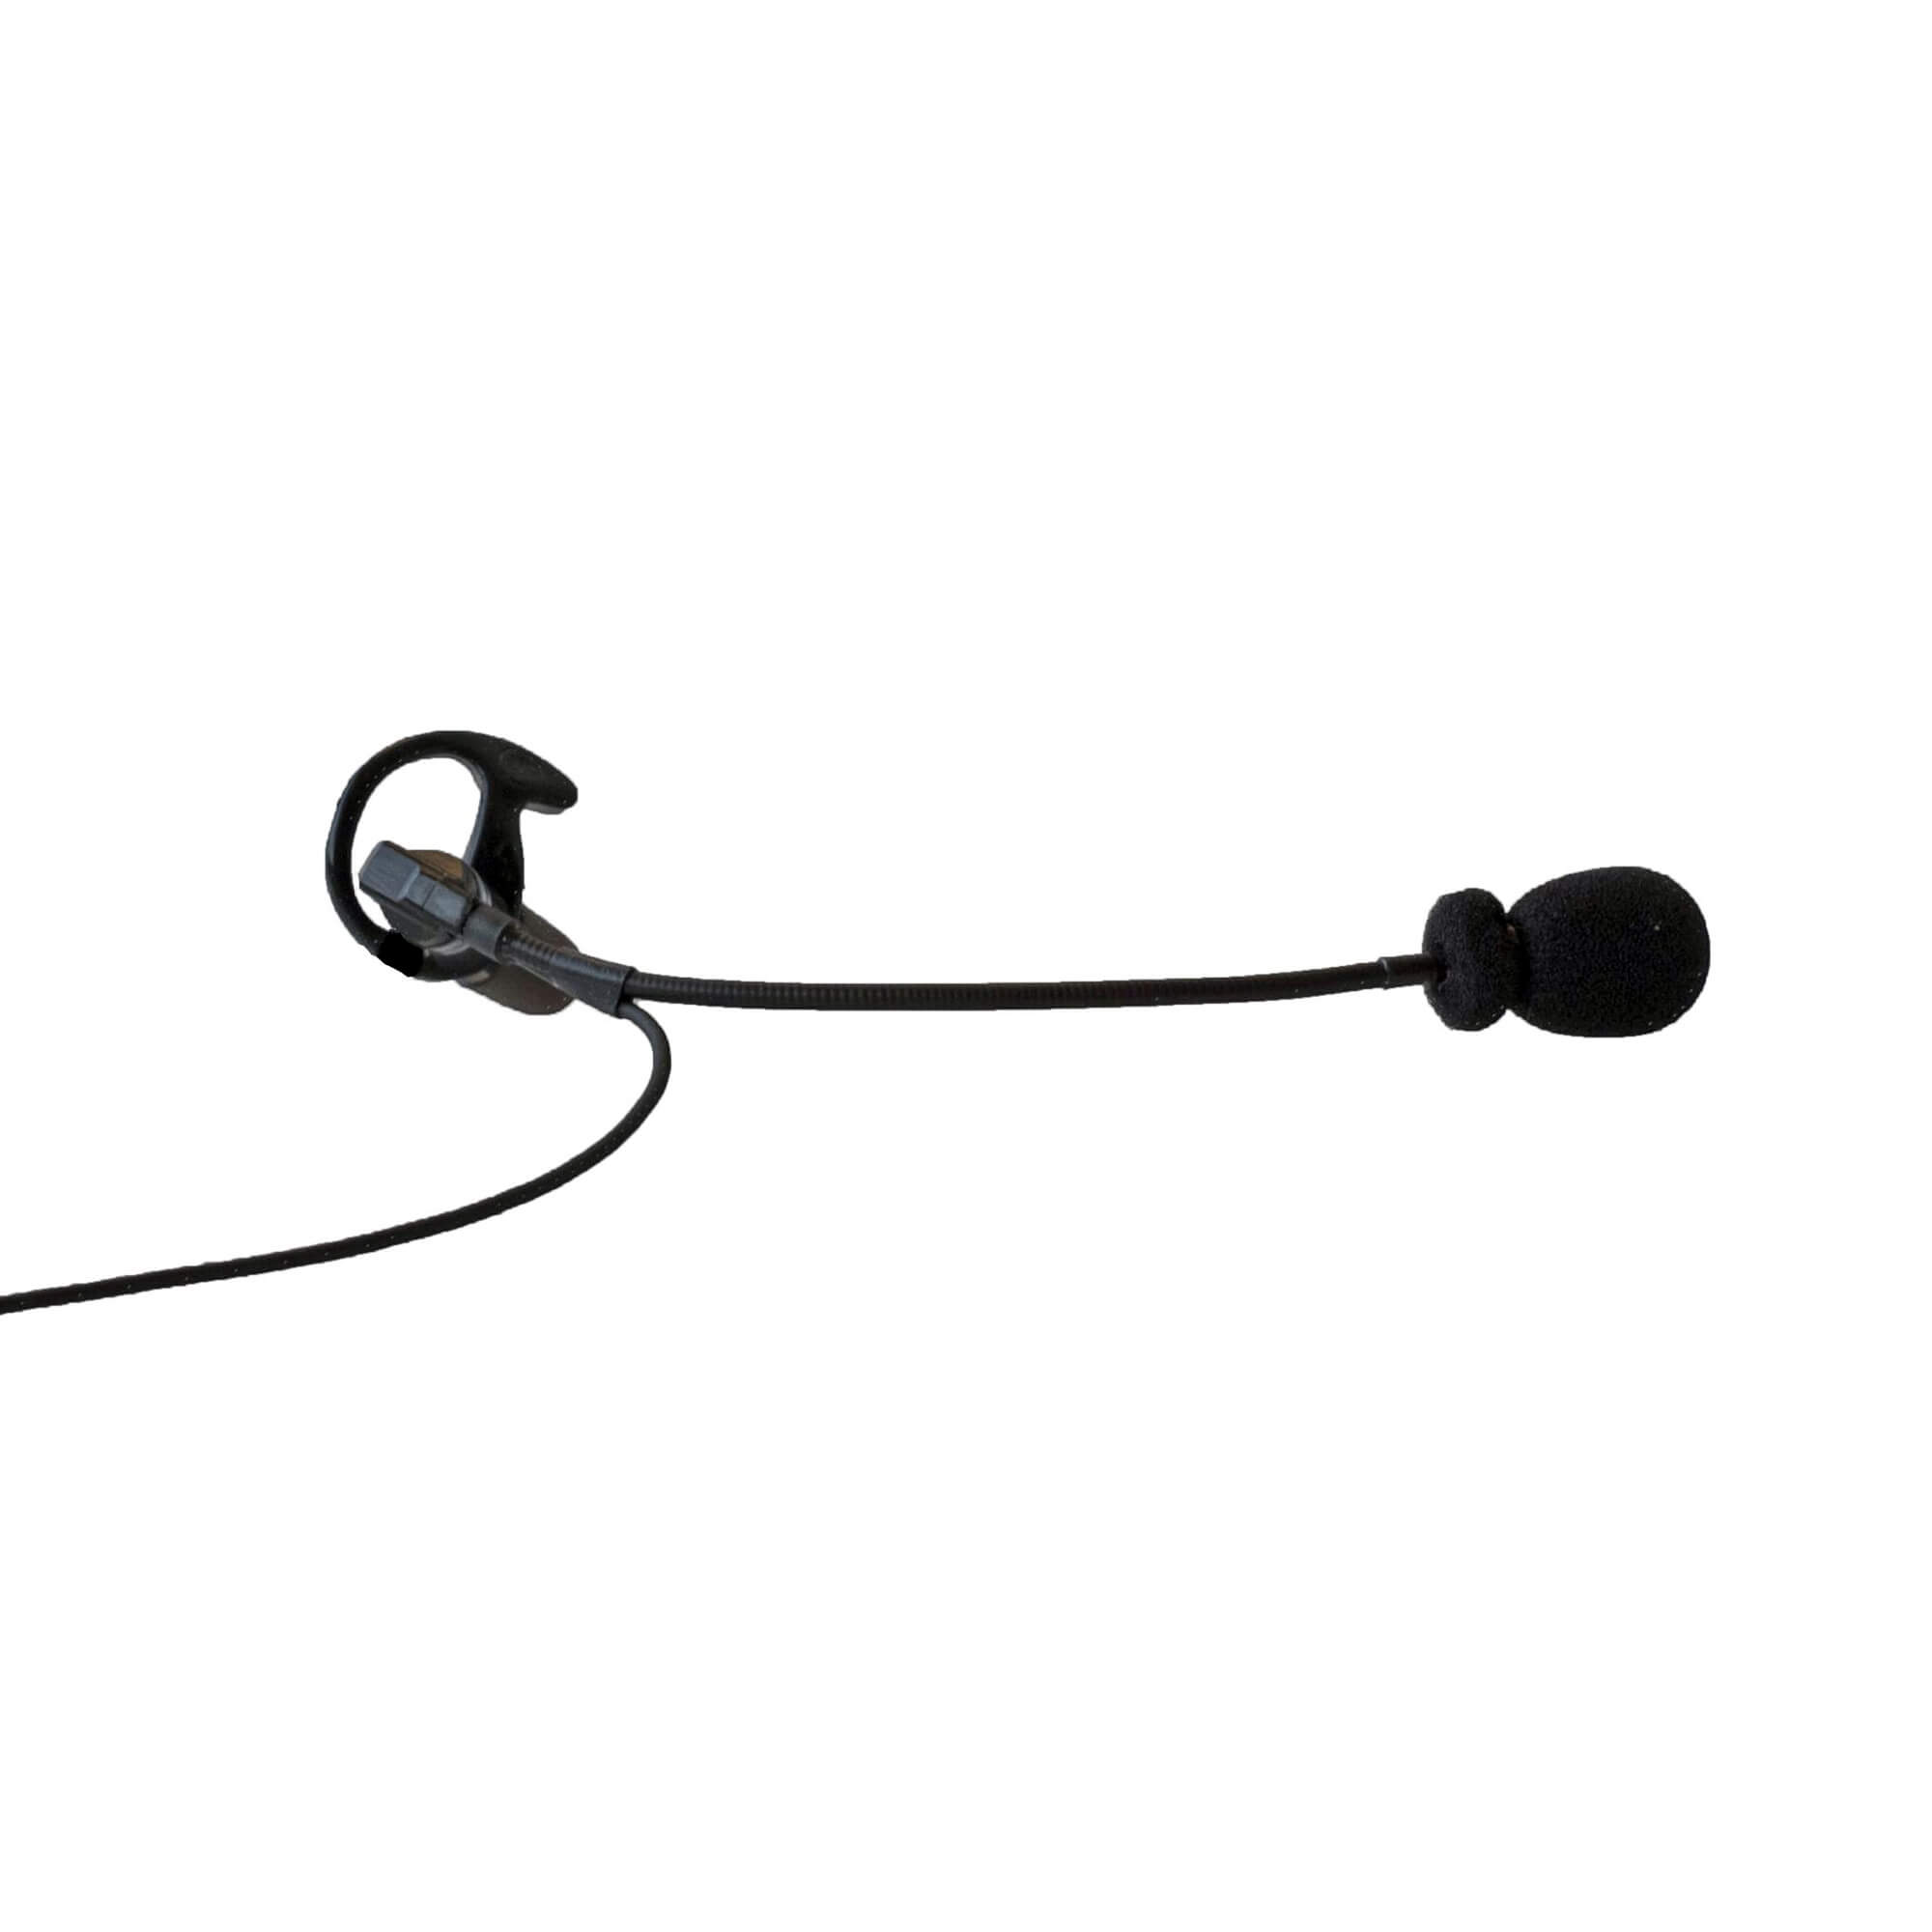 Axiwi HE-050 headset with universal earpiece - D2N